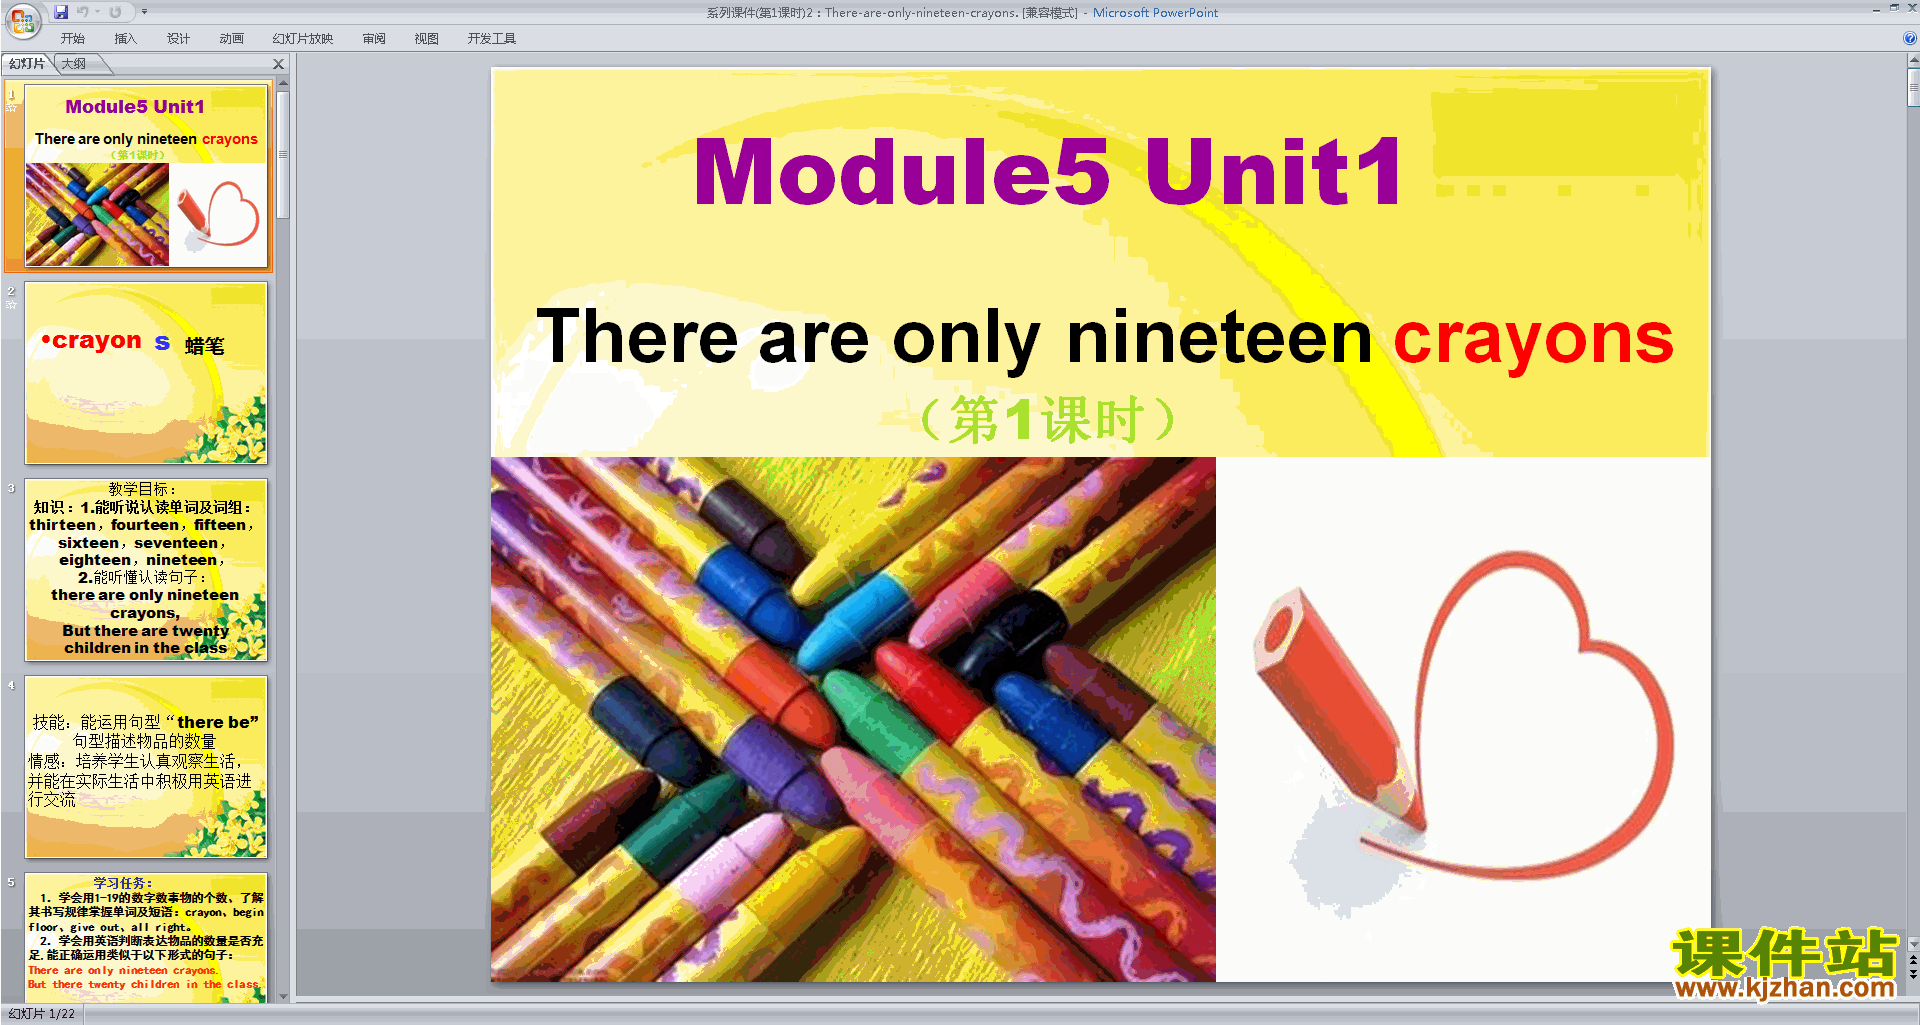 Module5 Unit1 There are only nineteen crayonsppt课件21